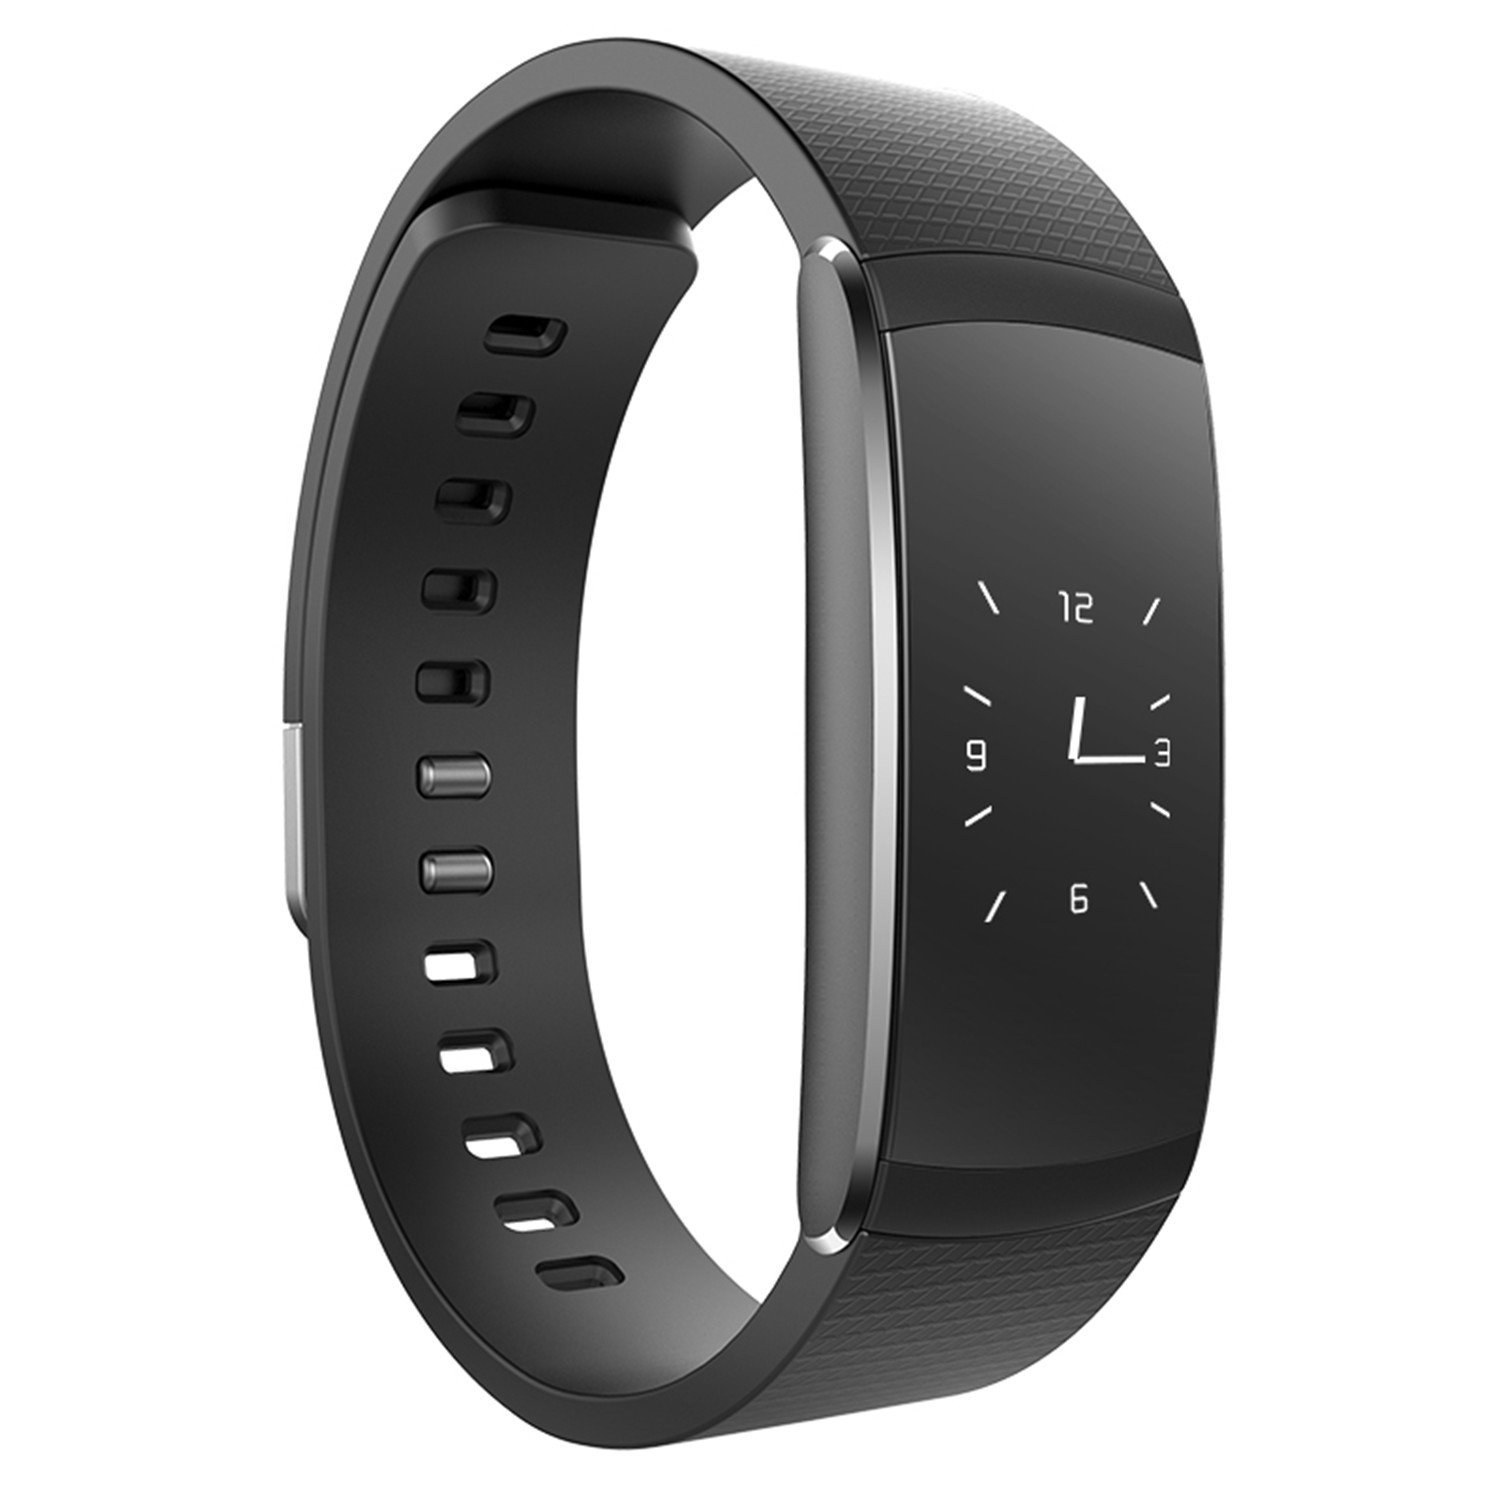 best budget fitness tracker very accurate and affordable superfashion.us